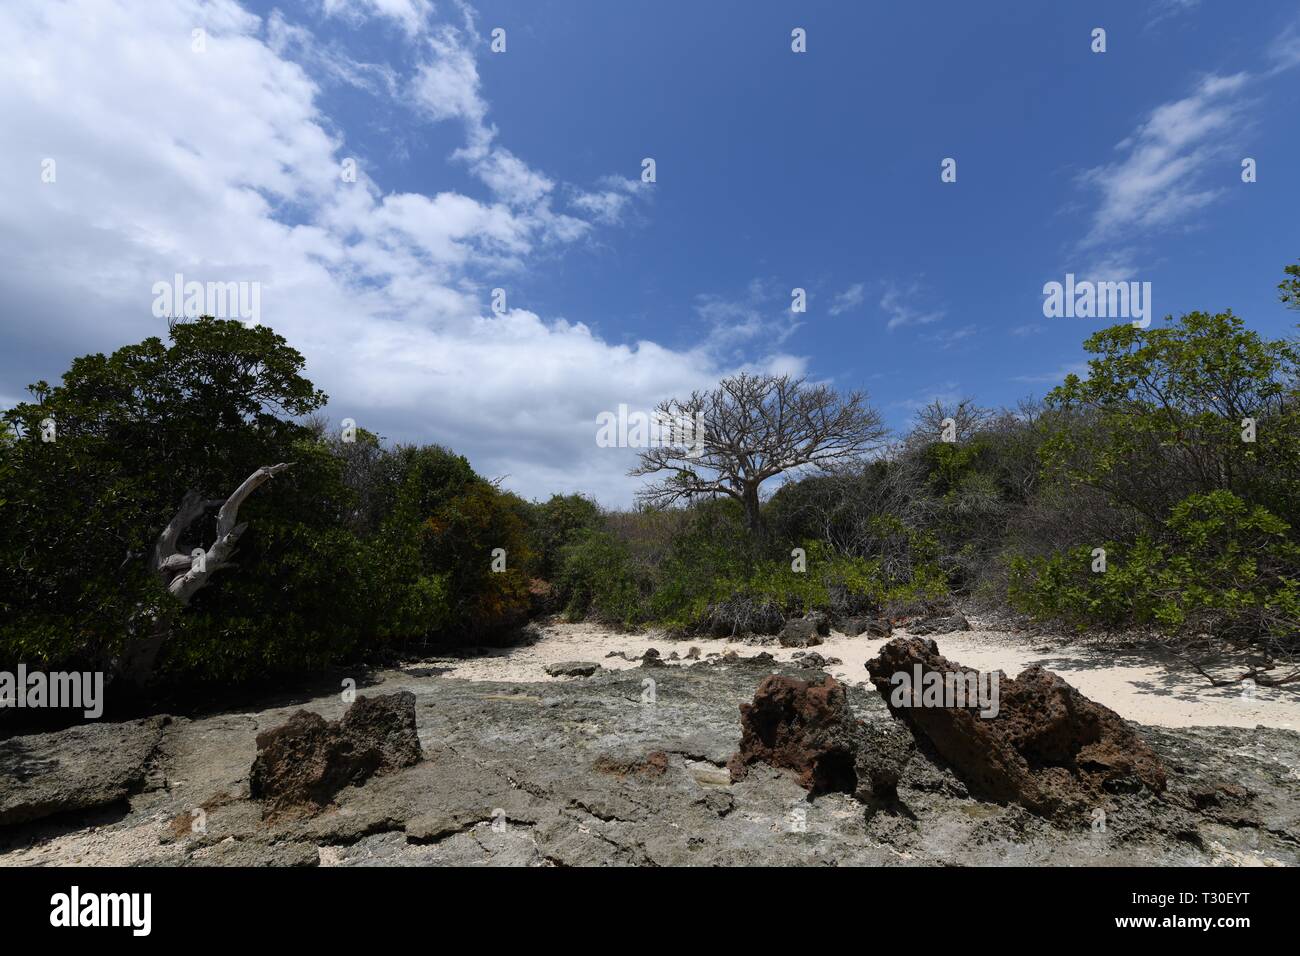 Rock formations at Turtle Beach/Heron Point on Azura Quilalea Private Island, Quirimbas Archipelago, Mozambique, Africa Stock Photo